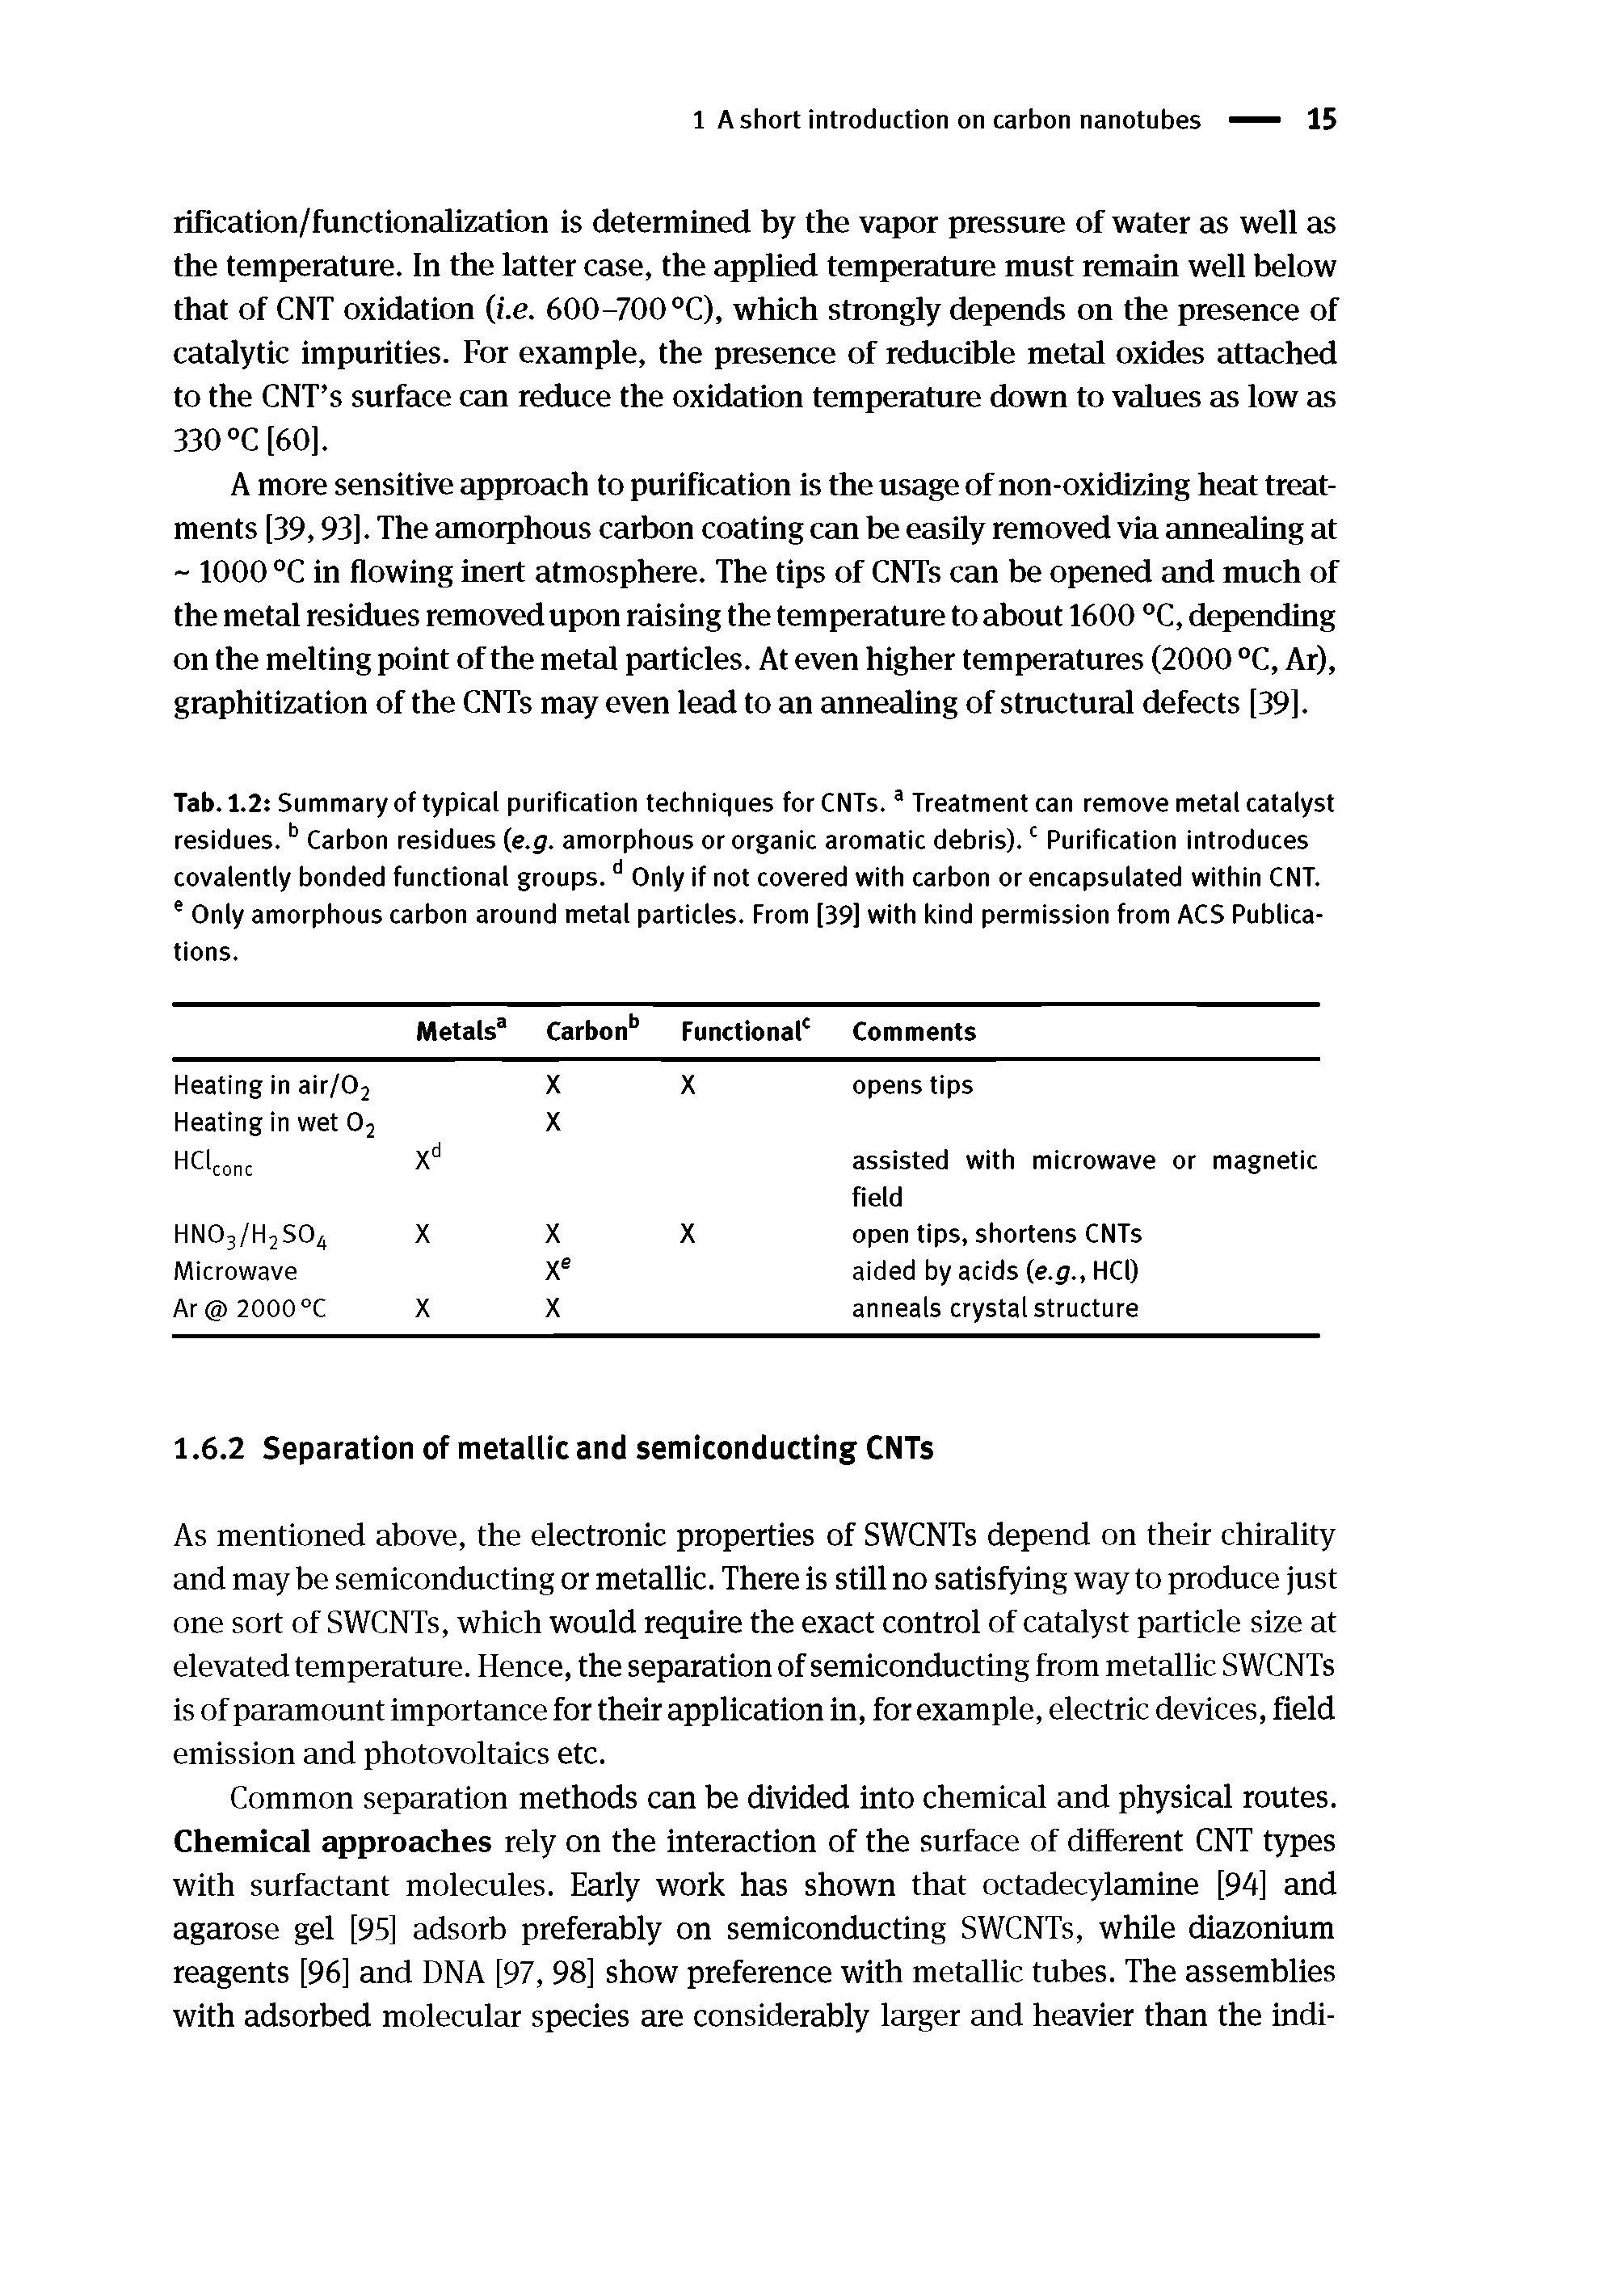 Tab. 1.2 Summary of typical purification techniques for CNTs. a Treatment can remove metal catalyst residues. b Carbon residues (e.g. amorphous or organic aromatic debris).c Purification introduces covalently bonded functional groups. d Only if not covered with carbon or encapsulated within CNT. e Only amorphous carbon around metal particles. From [39] with kind permission from ACS Publications.